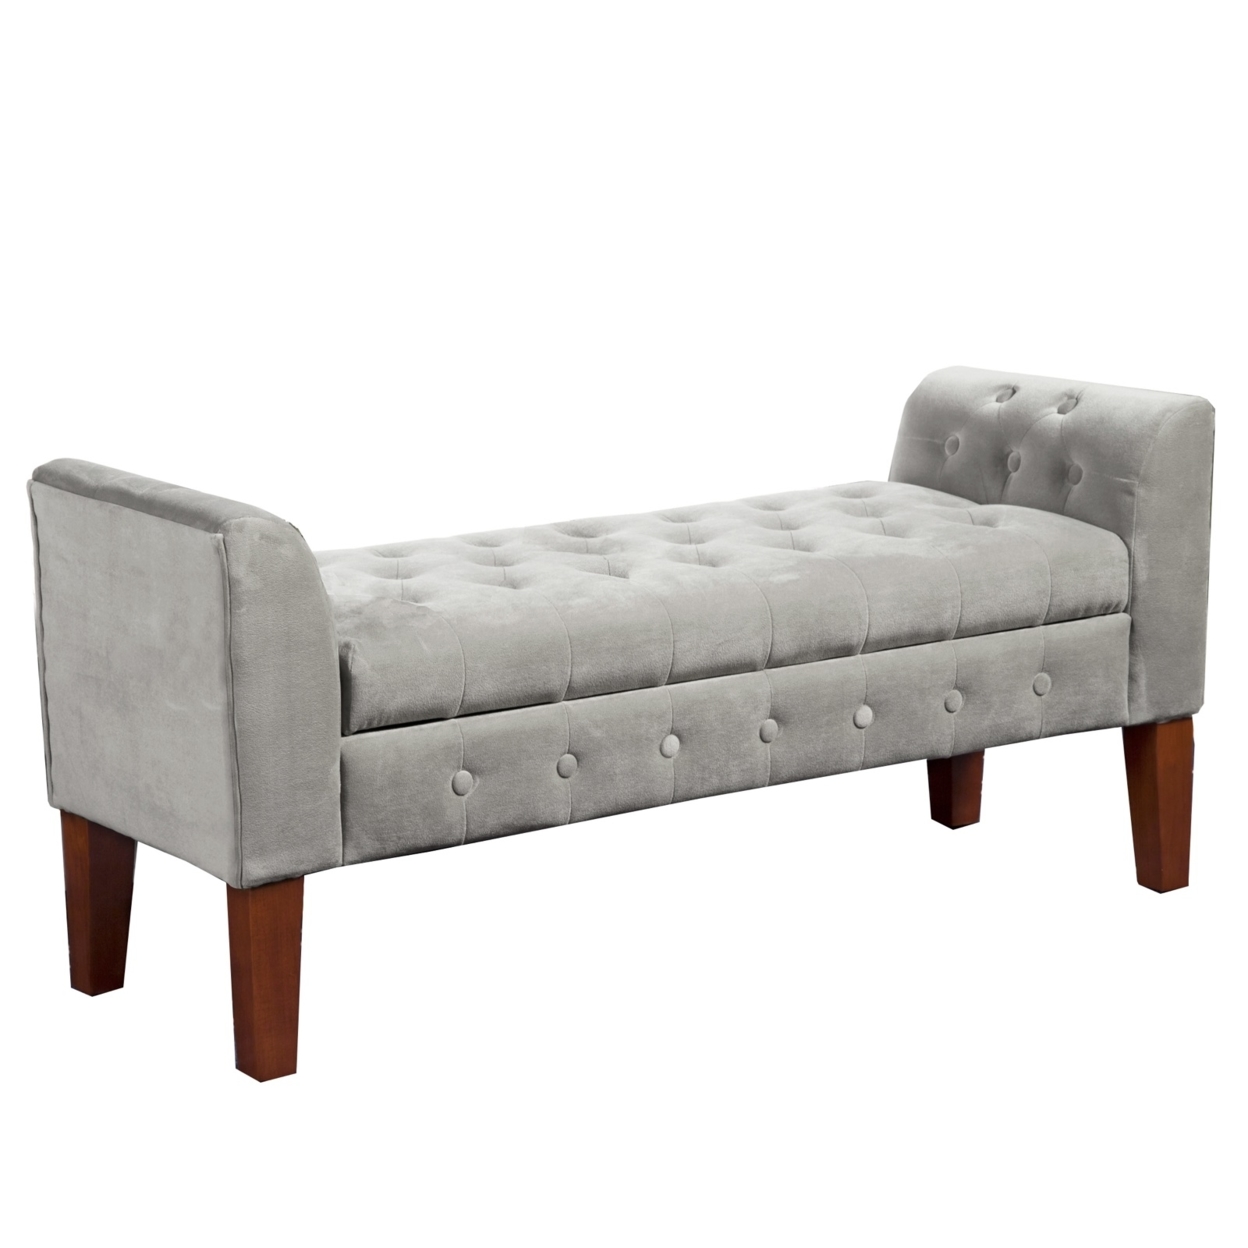 Velvet Upholstered Button Tufted Wooden Bench Settee With Hinged Storage, Gray And Brown- Saltoro Sherpi